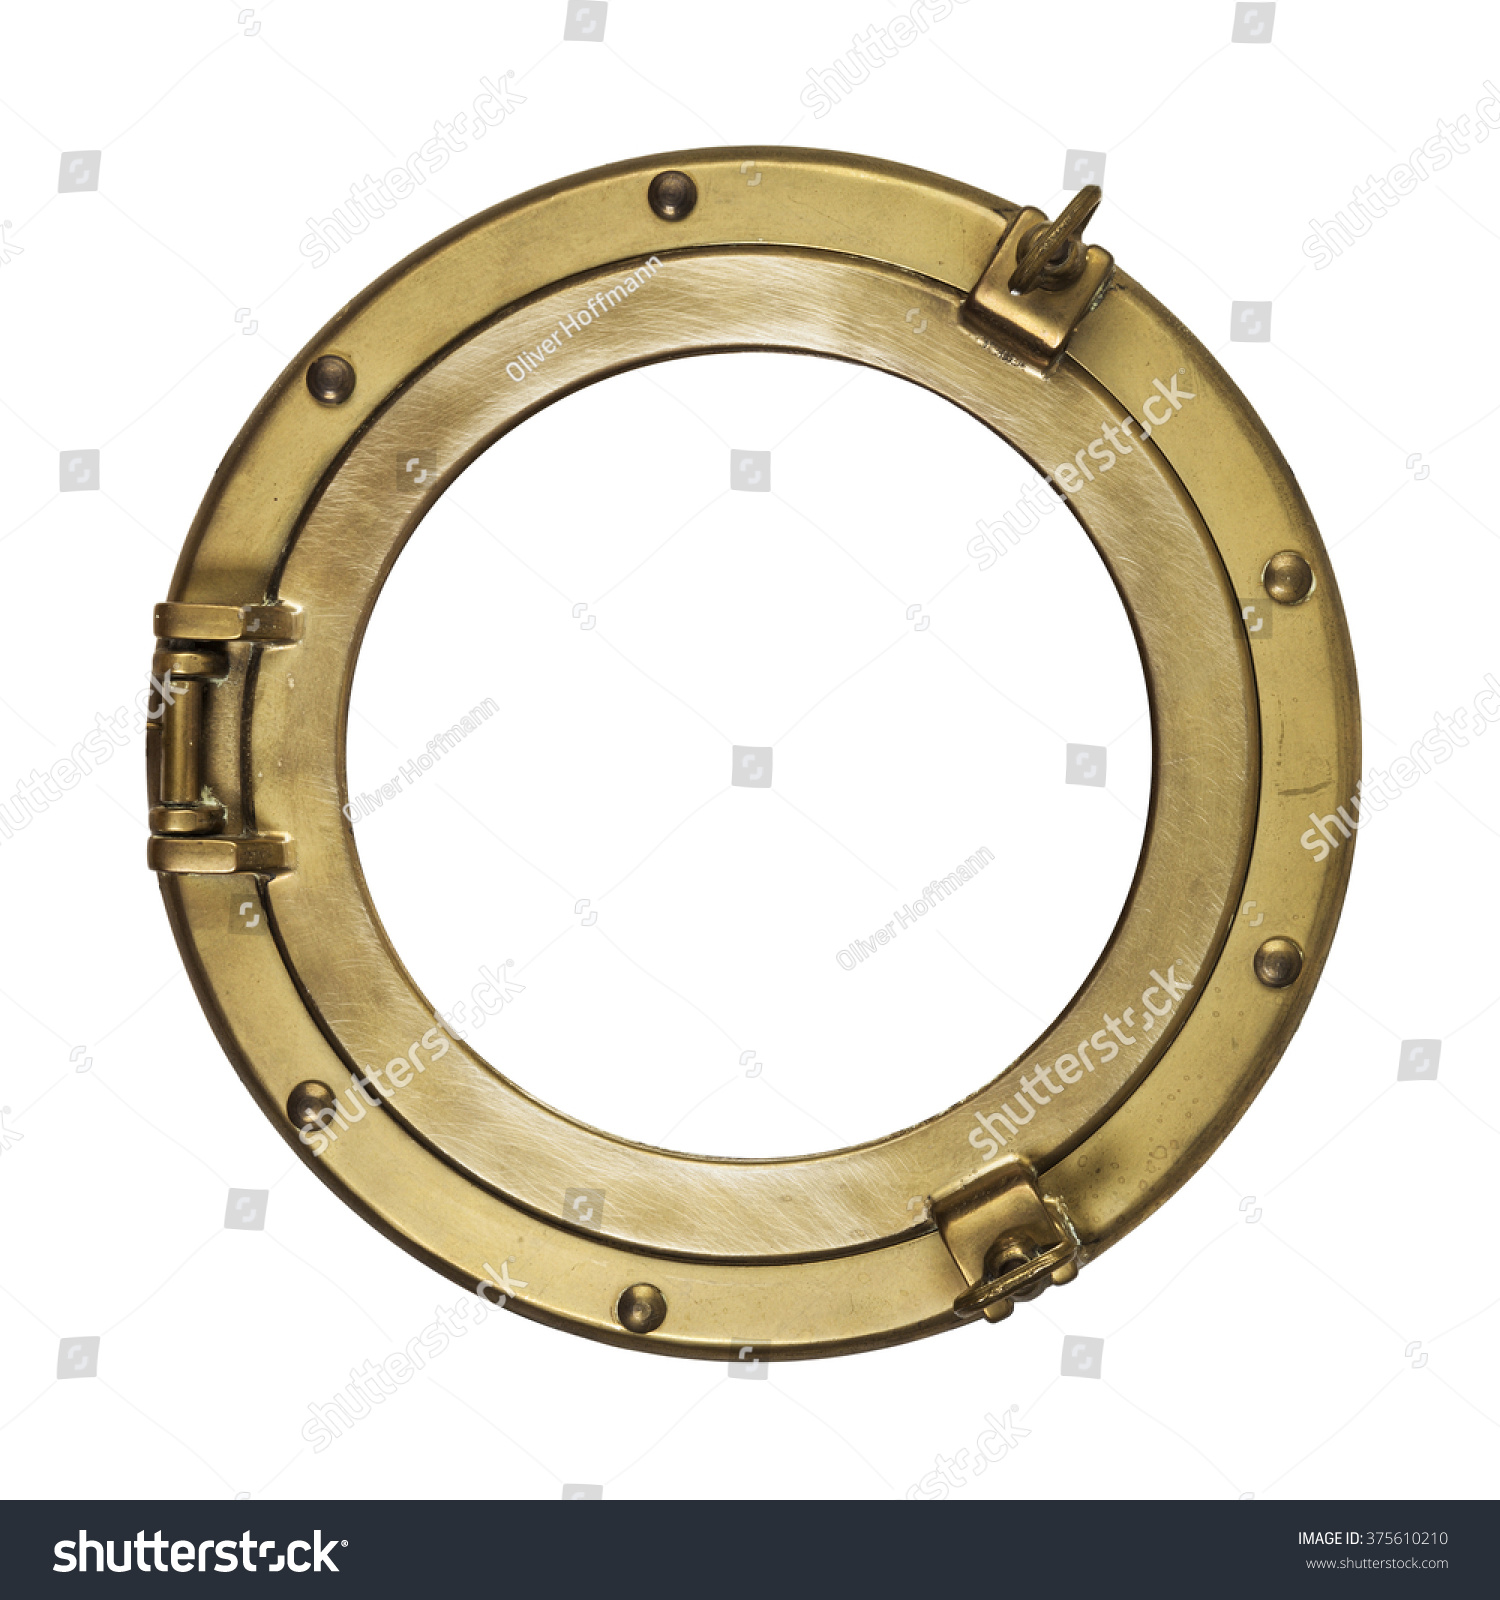 Porthole isolated with clipping path. Vintage brass porthole isolated with clipping path on white background #375610210